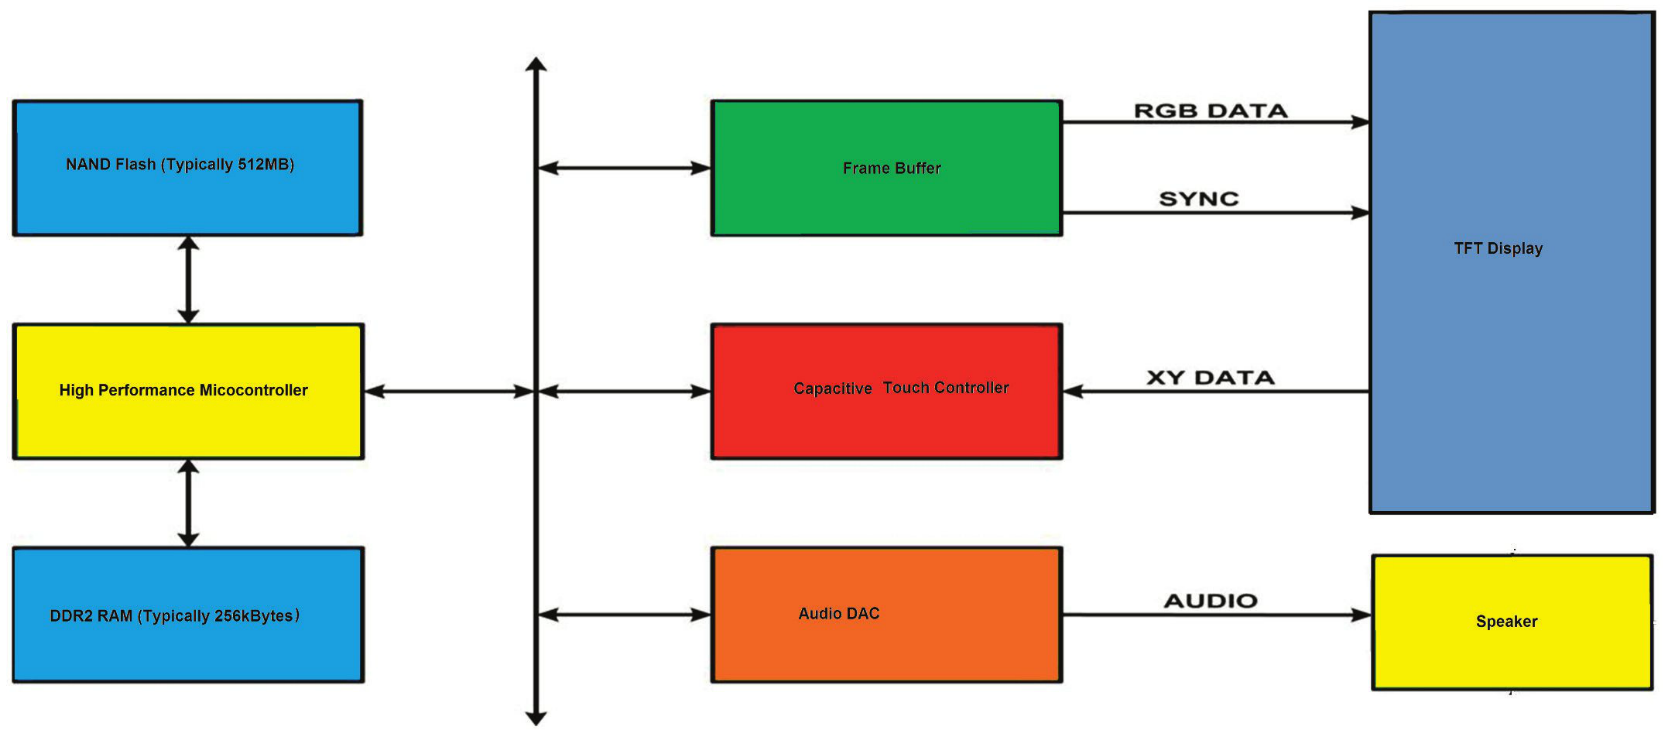 Figure 1: Schematic of an MP3 player system based on a FT900 microcontroller and an FT800 graphic controller